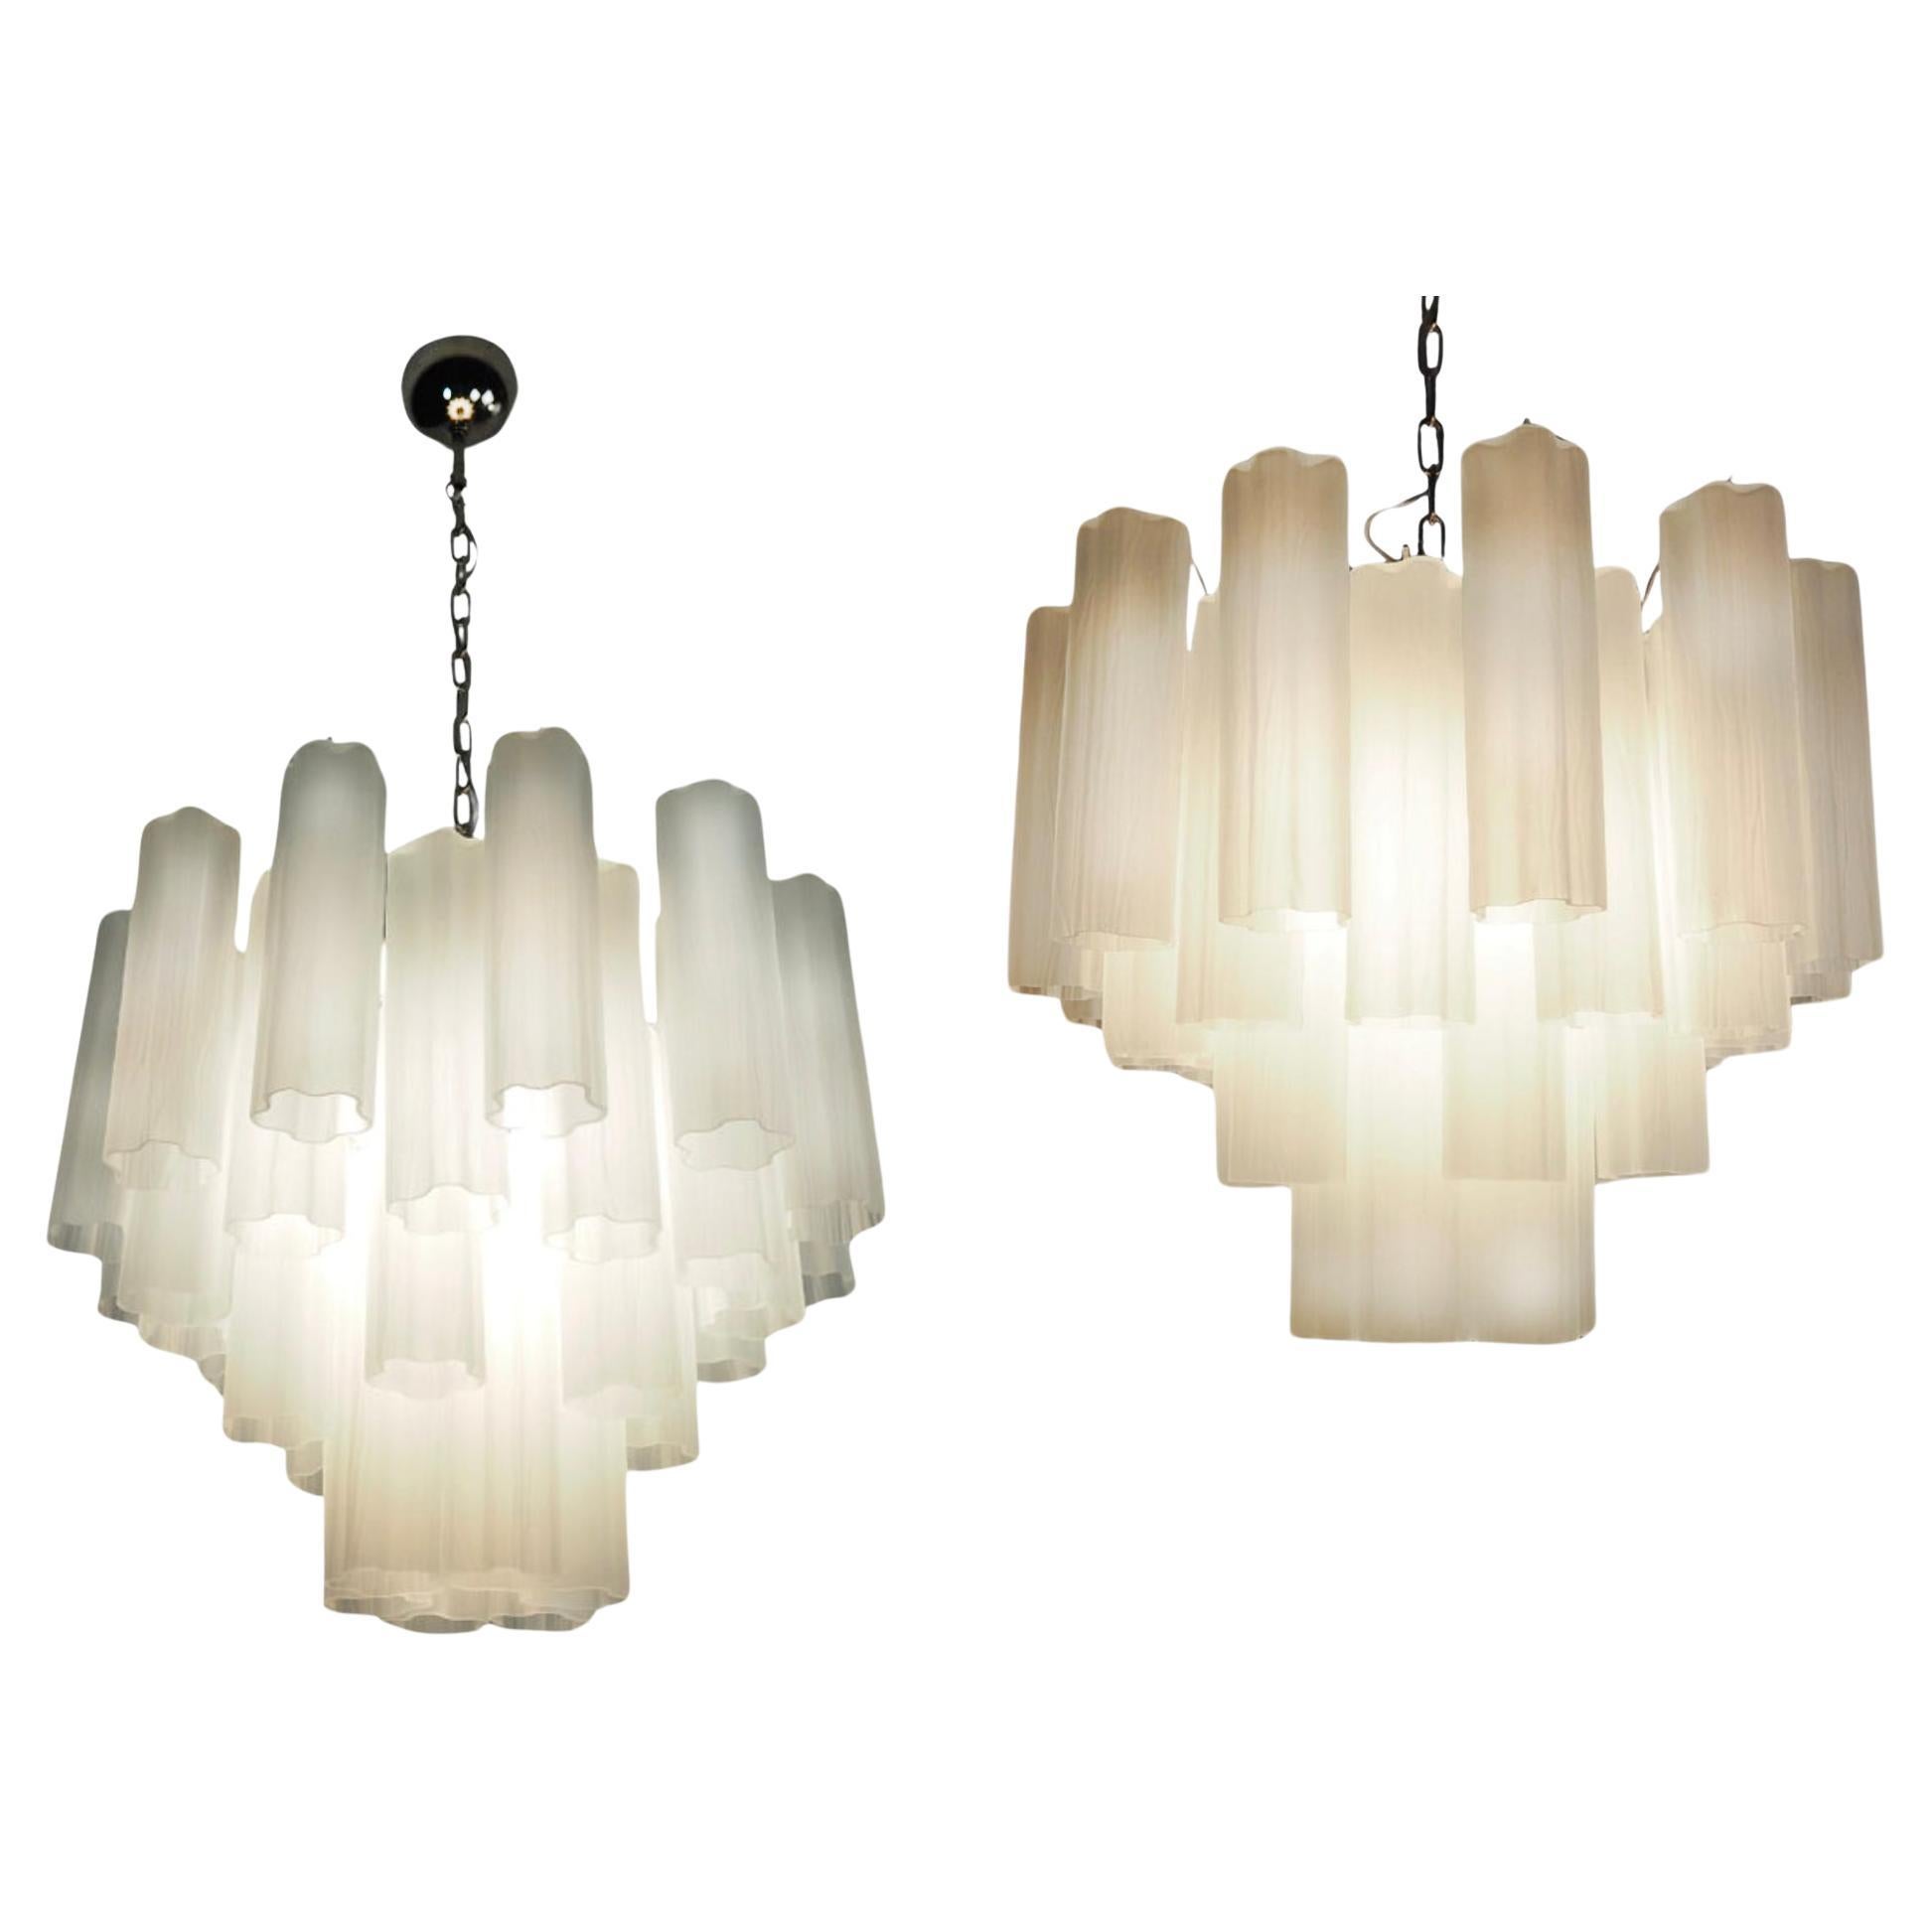 Gorgeous Murano Glass Tube Chandeliers - 36 etched glass tube For Sale